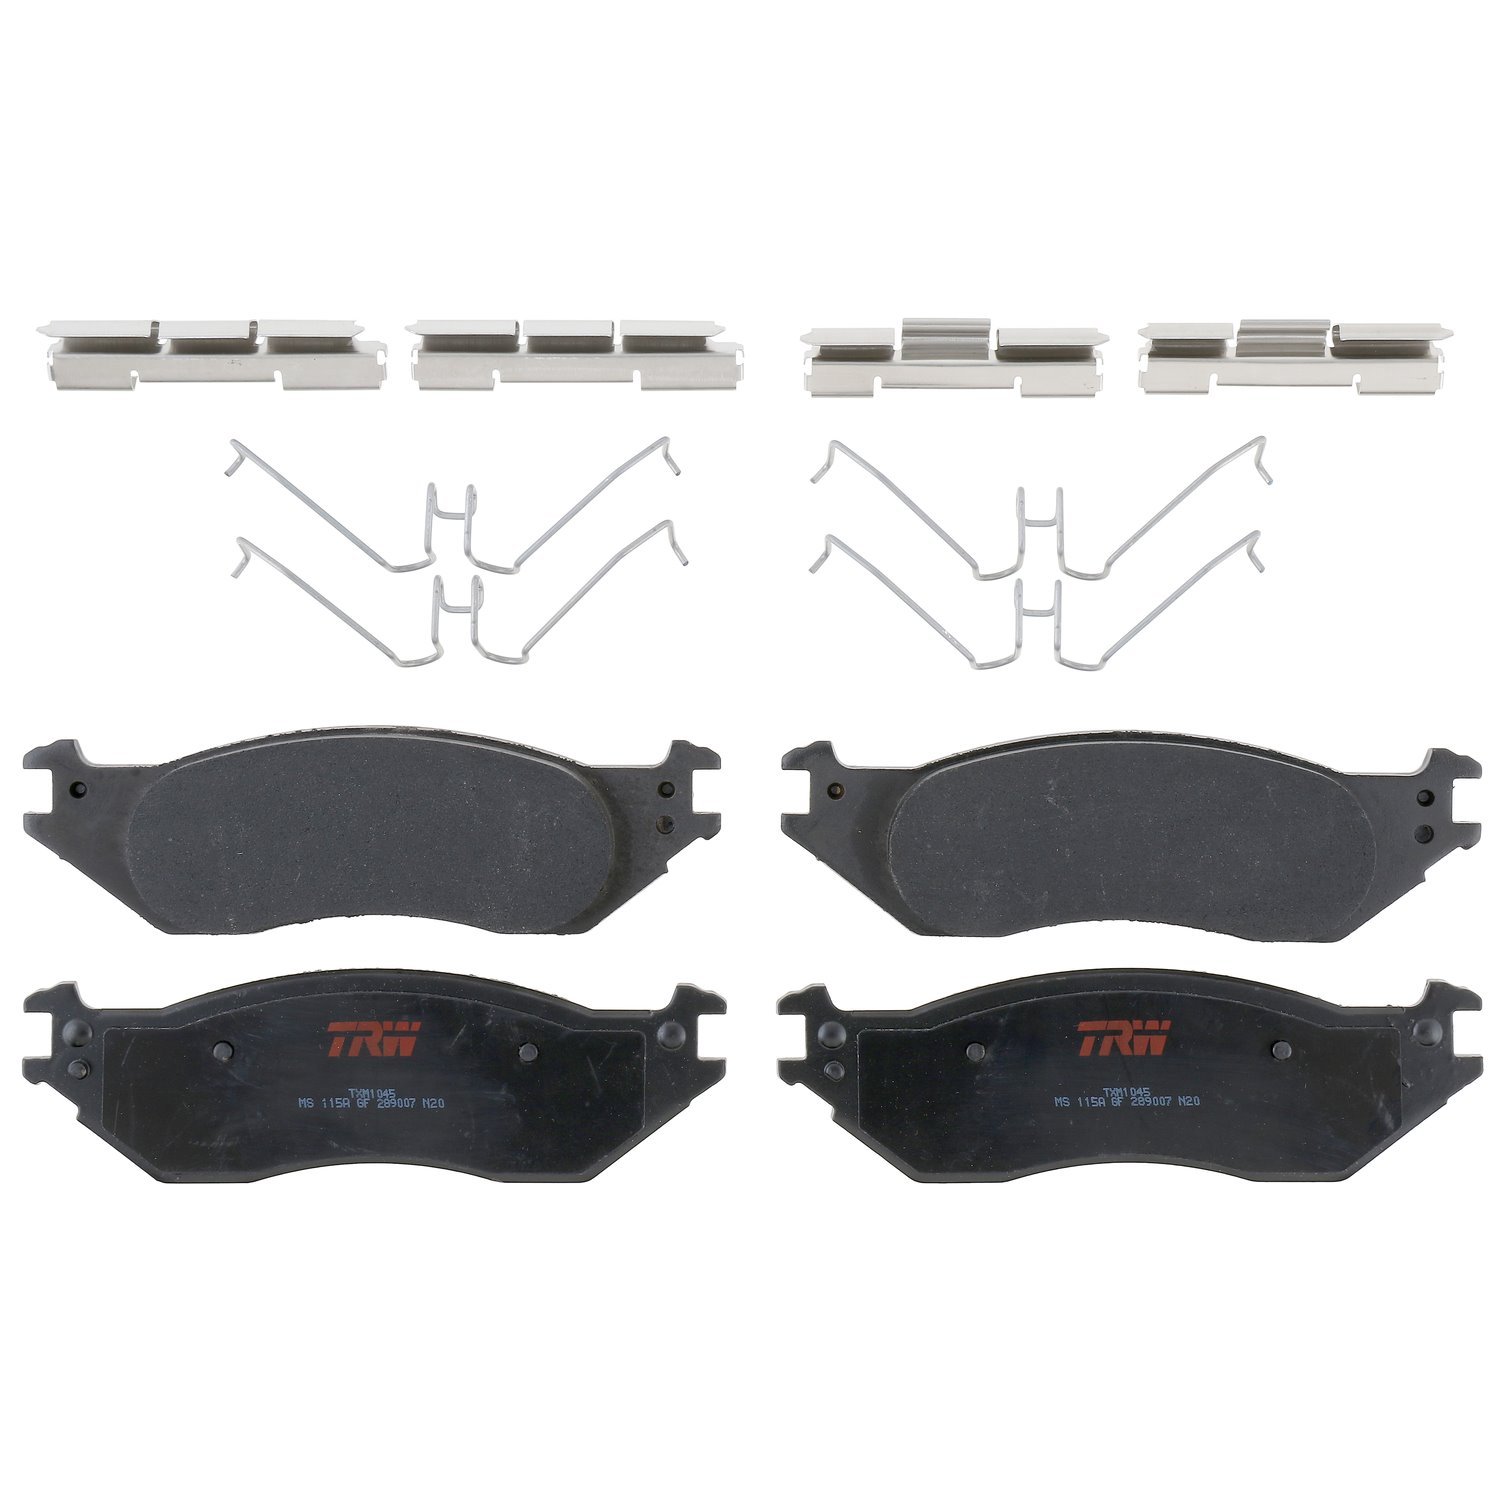 TXM1045 Ultra-Series Disc Brake Pad Set for Ford E-150 2006-2003, E-150 Club Wagon 2005-2003, Position: Front